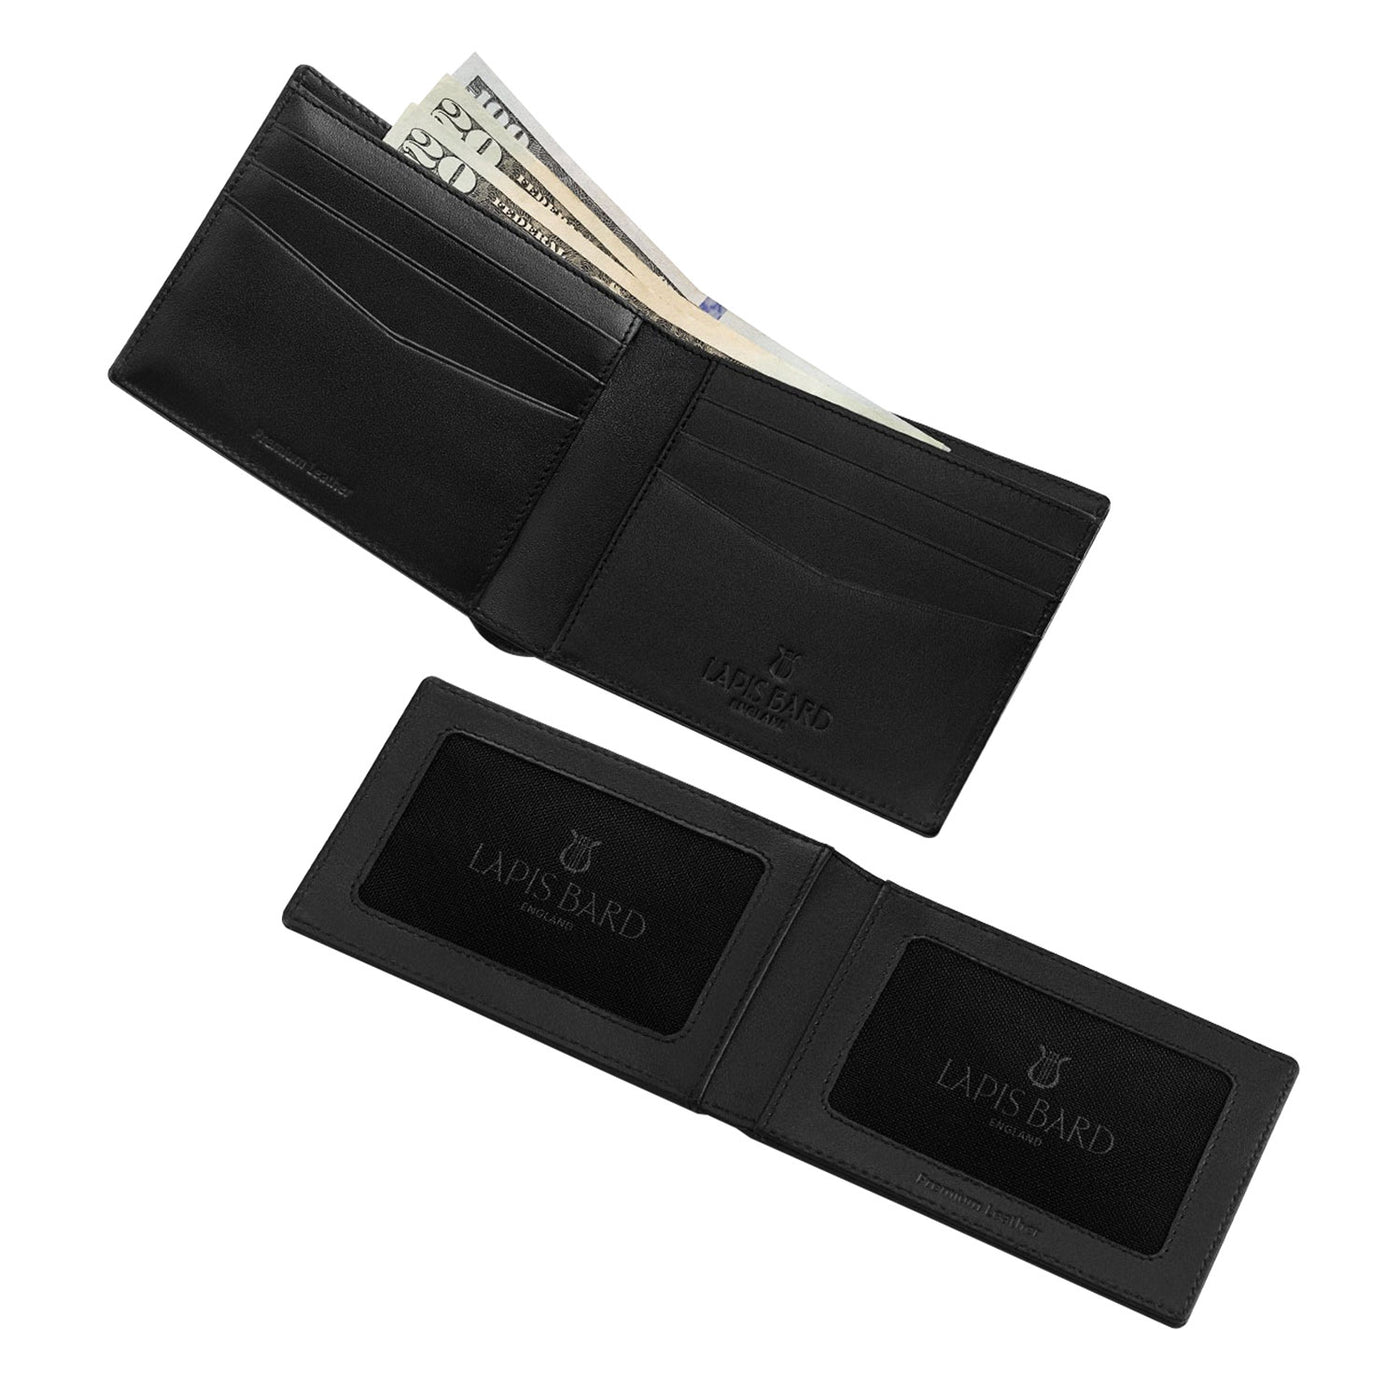 Lapis Bard Mayfair Bifold 6cc Wallet with Additional Sleeve - Black 3